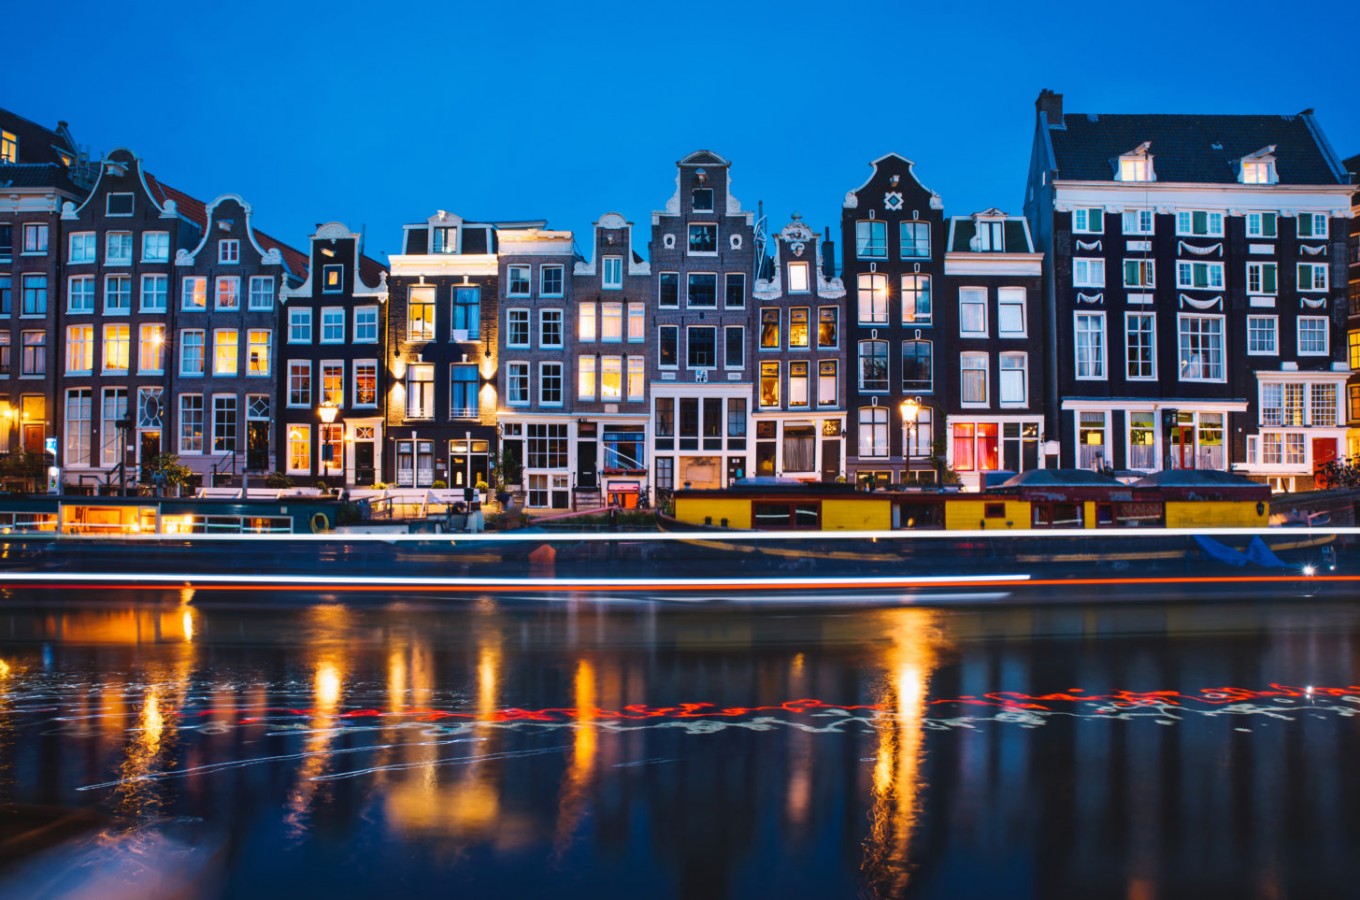 Evening light view over a canal at traditional Amsterdam buildings